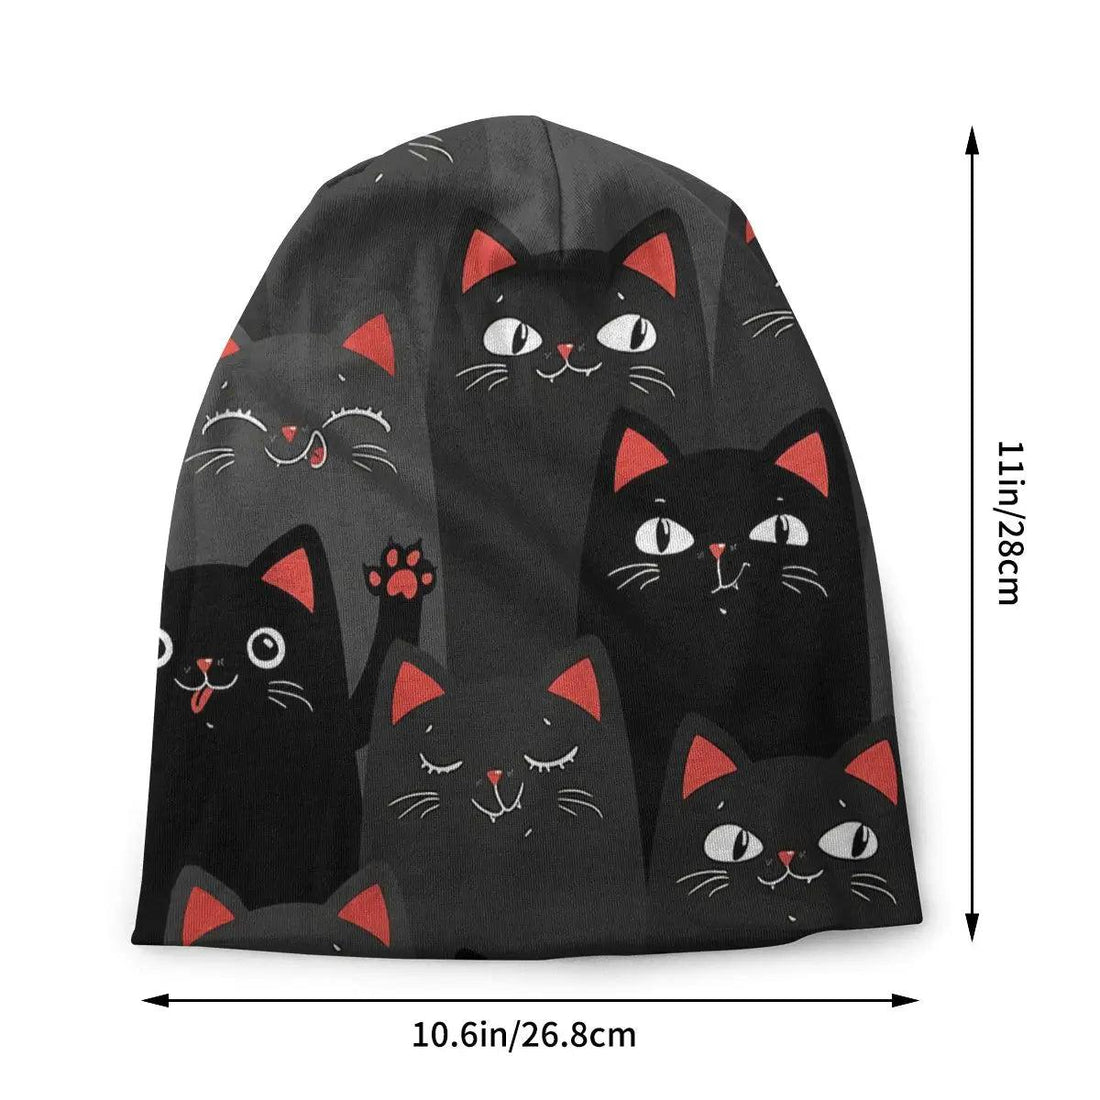 Cute Black Cat Winter Beanie - Just Cats - Gifts for Cat Lovers